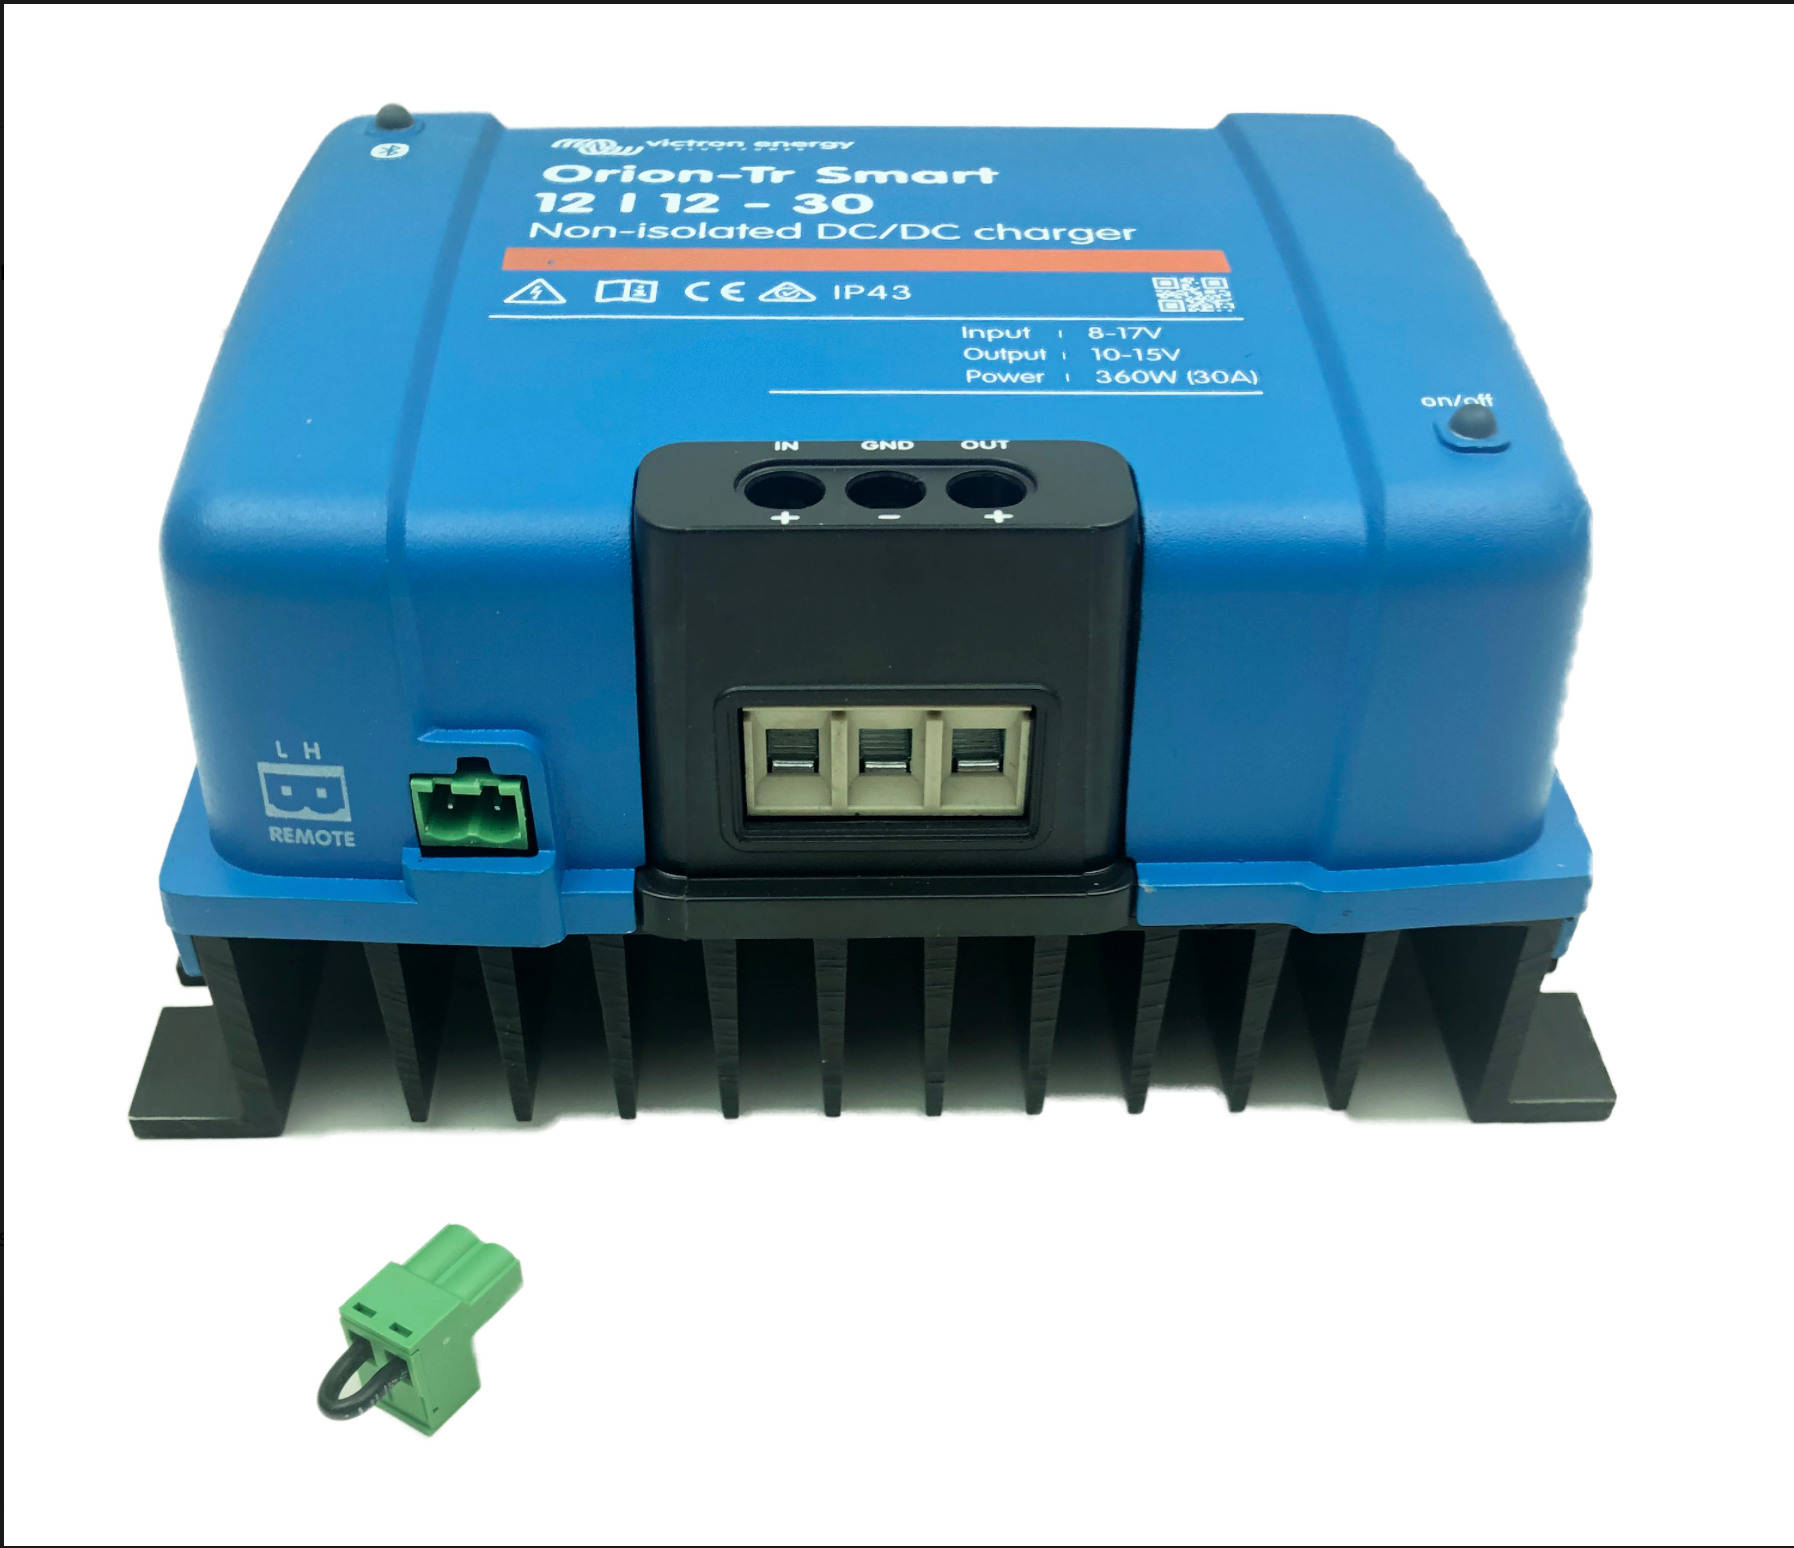 Victron Orion-Tr Smart 12/12-30A (360W) Non-isolated DC-DC charger [ORI121236140]